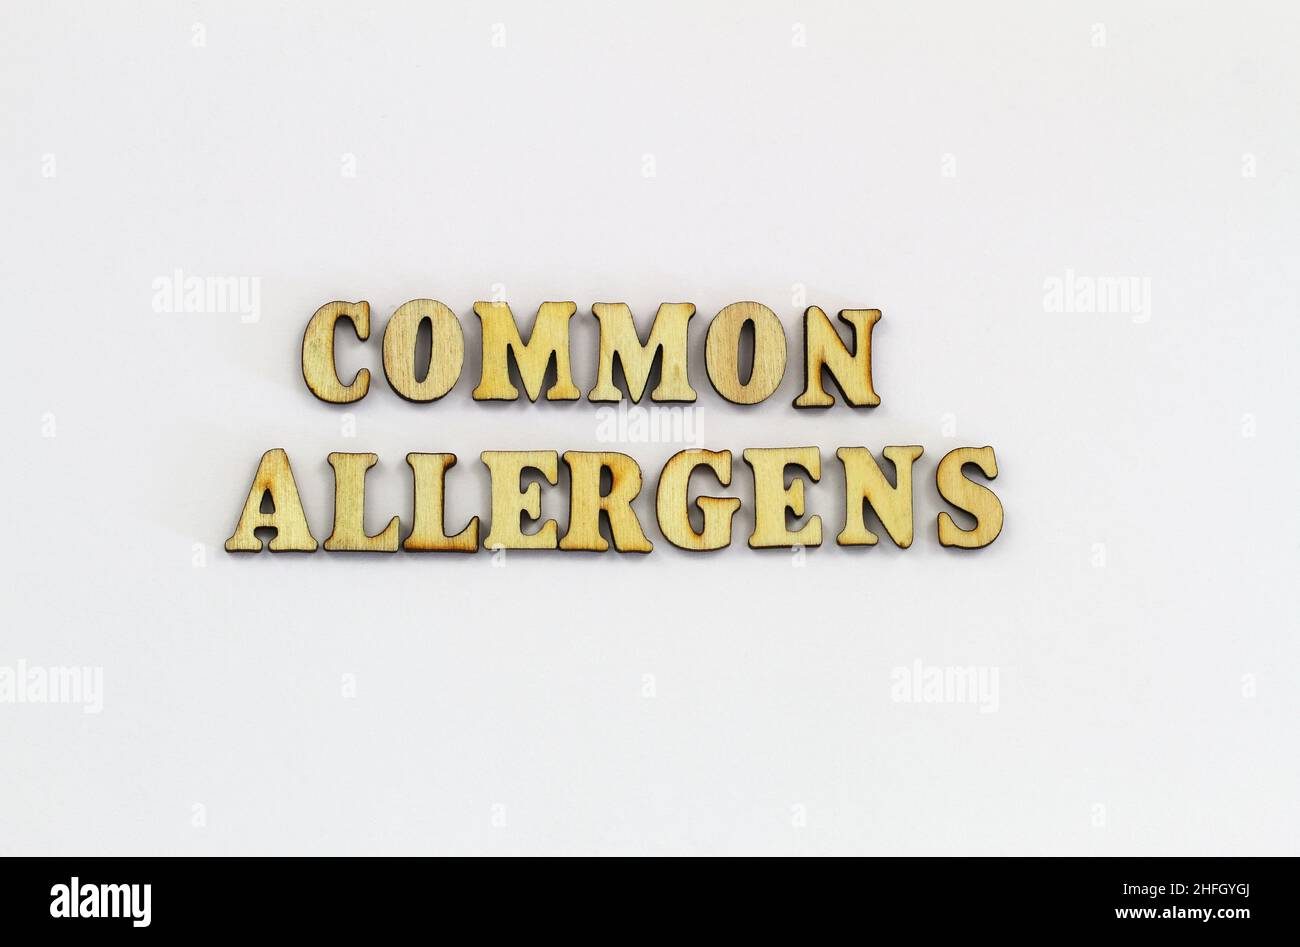 Common allergens written with wooden letters on white surface Stock Photo